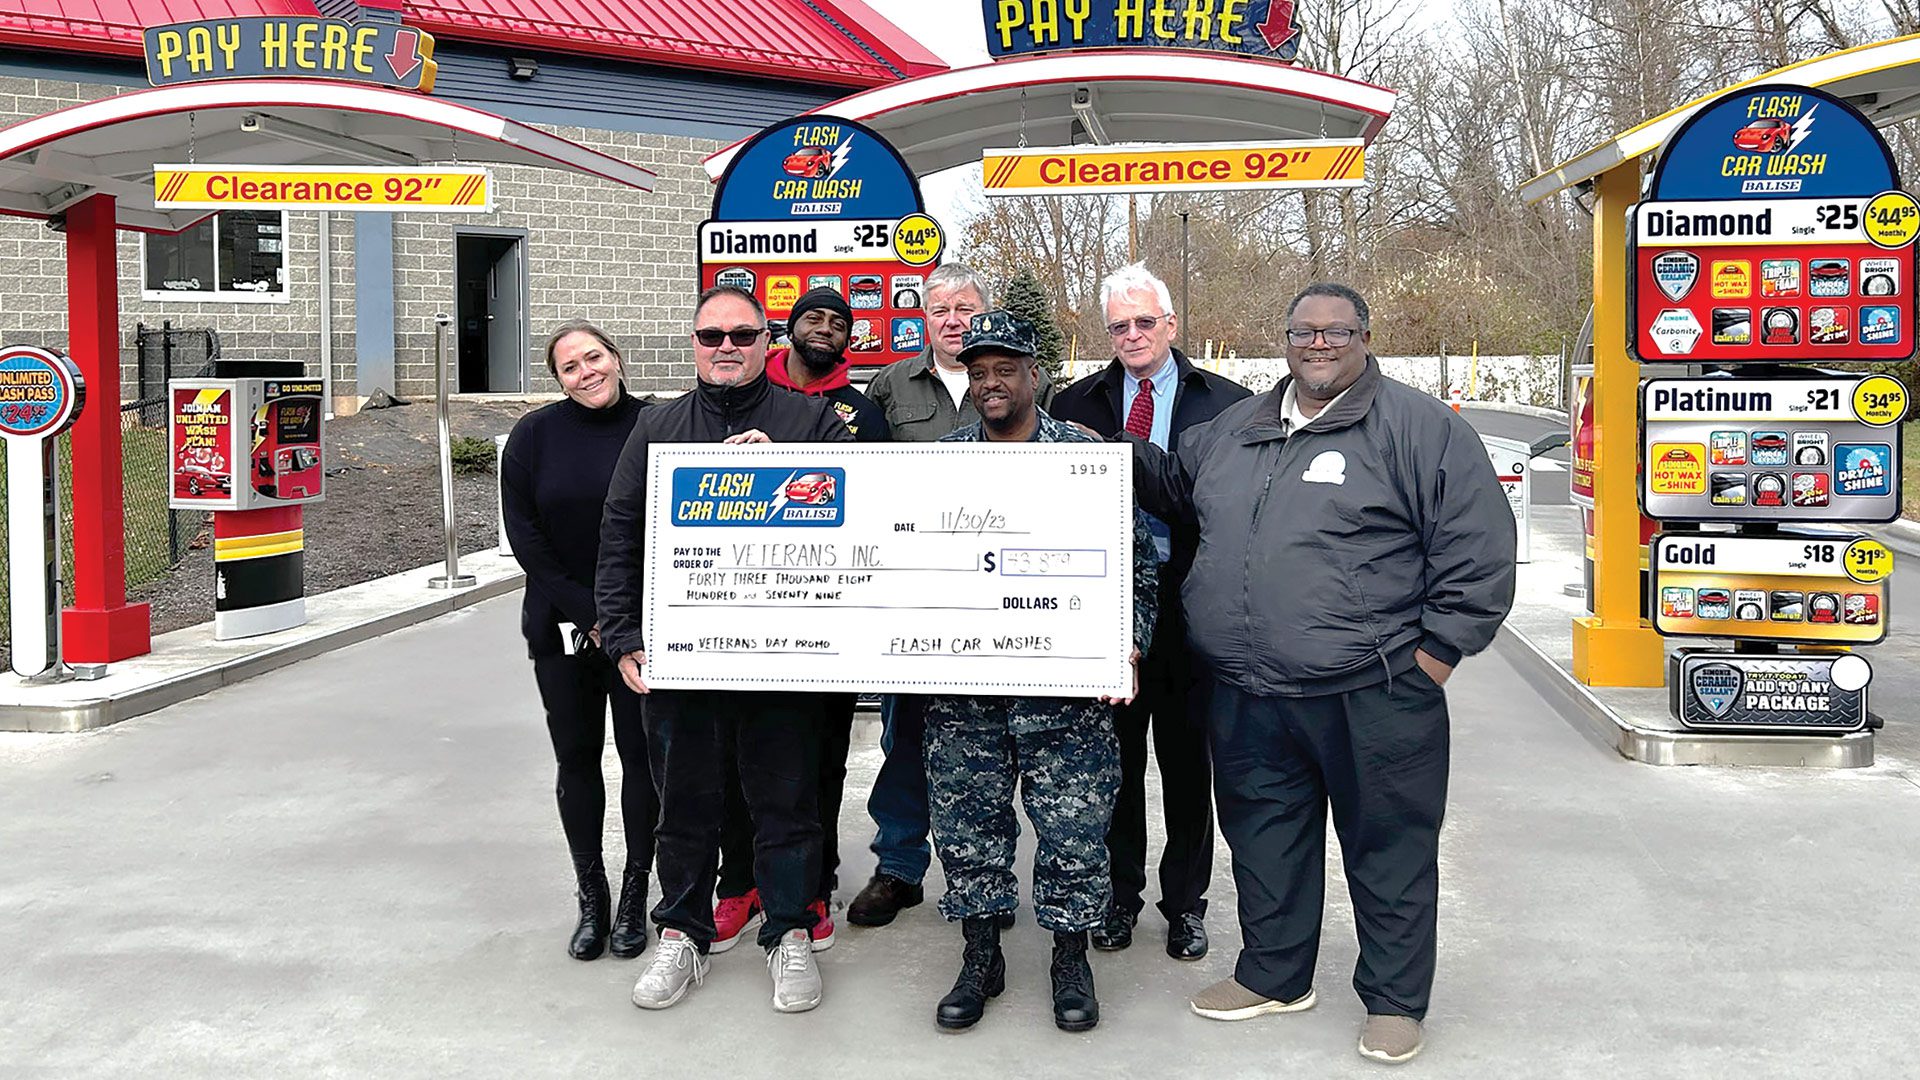 Flash Car Wash extended thanks to veterans and active service members by giving them a total of 1,067 complimentary diamond washes